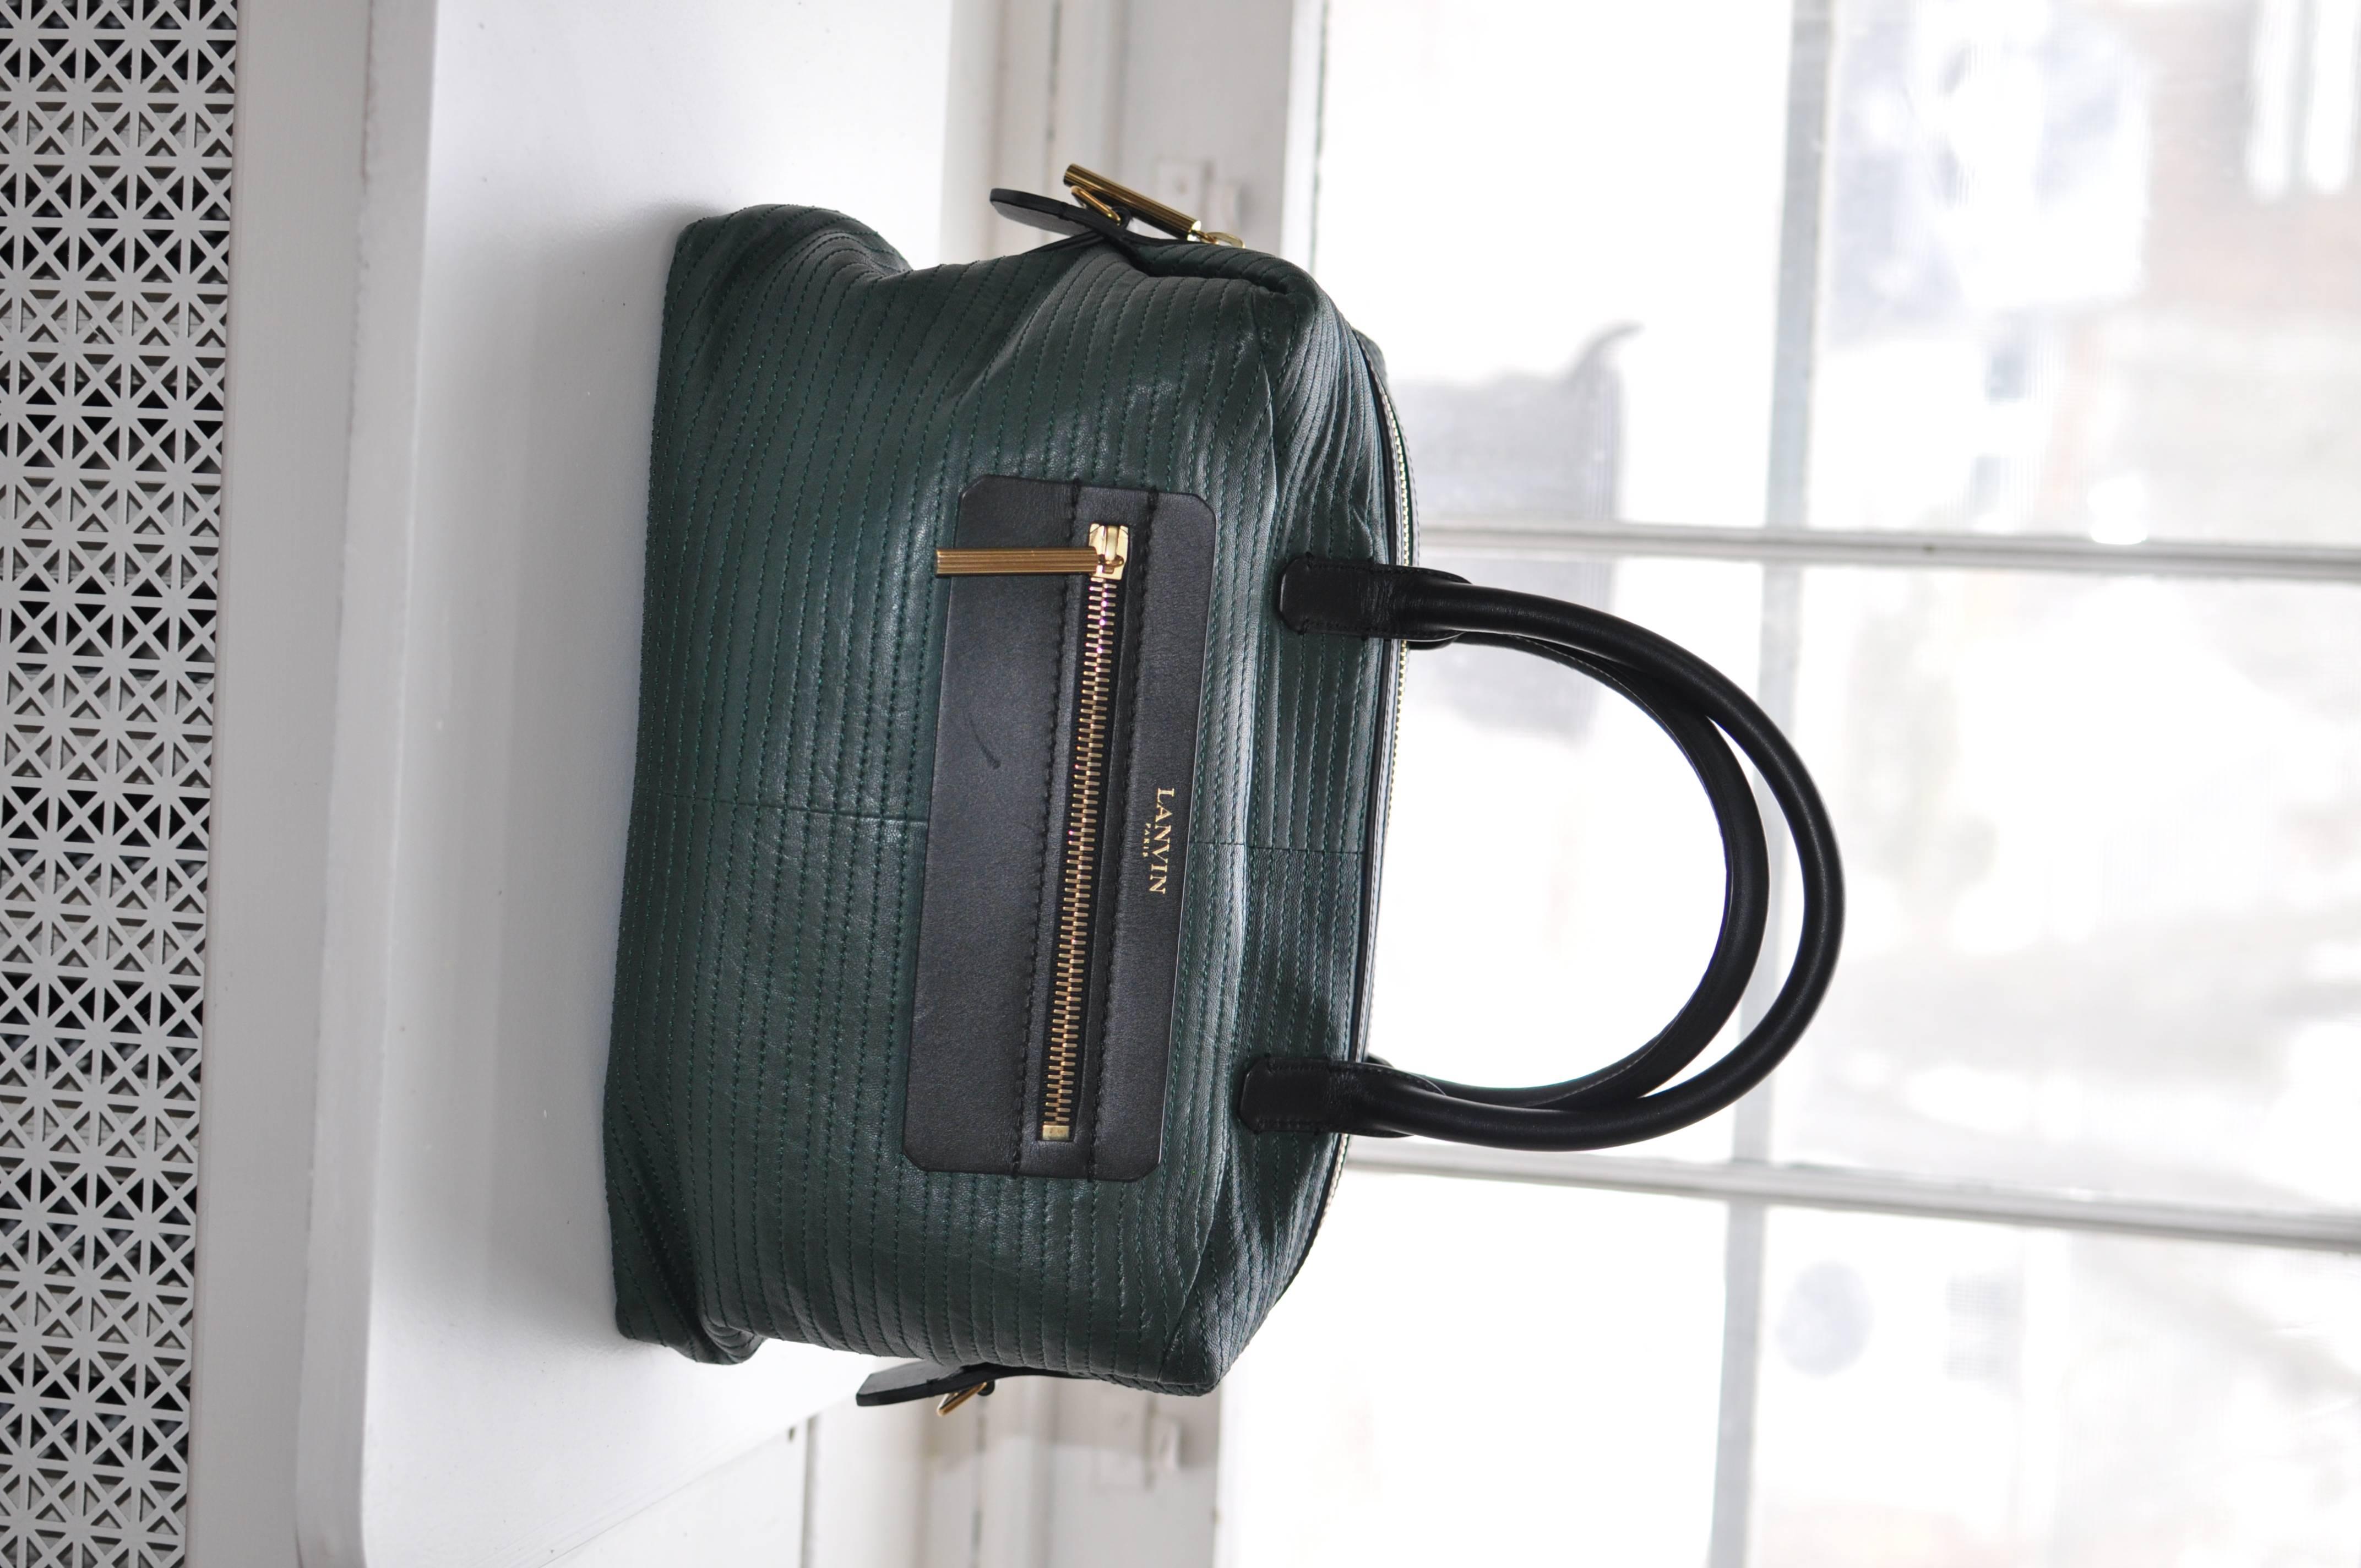 This is a really lovely bag in excellent condition in and out. It has a zipped feature pocket in front in a contrasting black as well as snap closure pocket on the back. The lining as a zipped pocket as well as a slit pocket. The handbag also